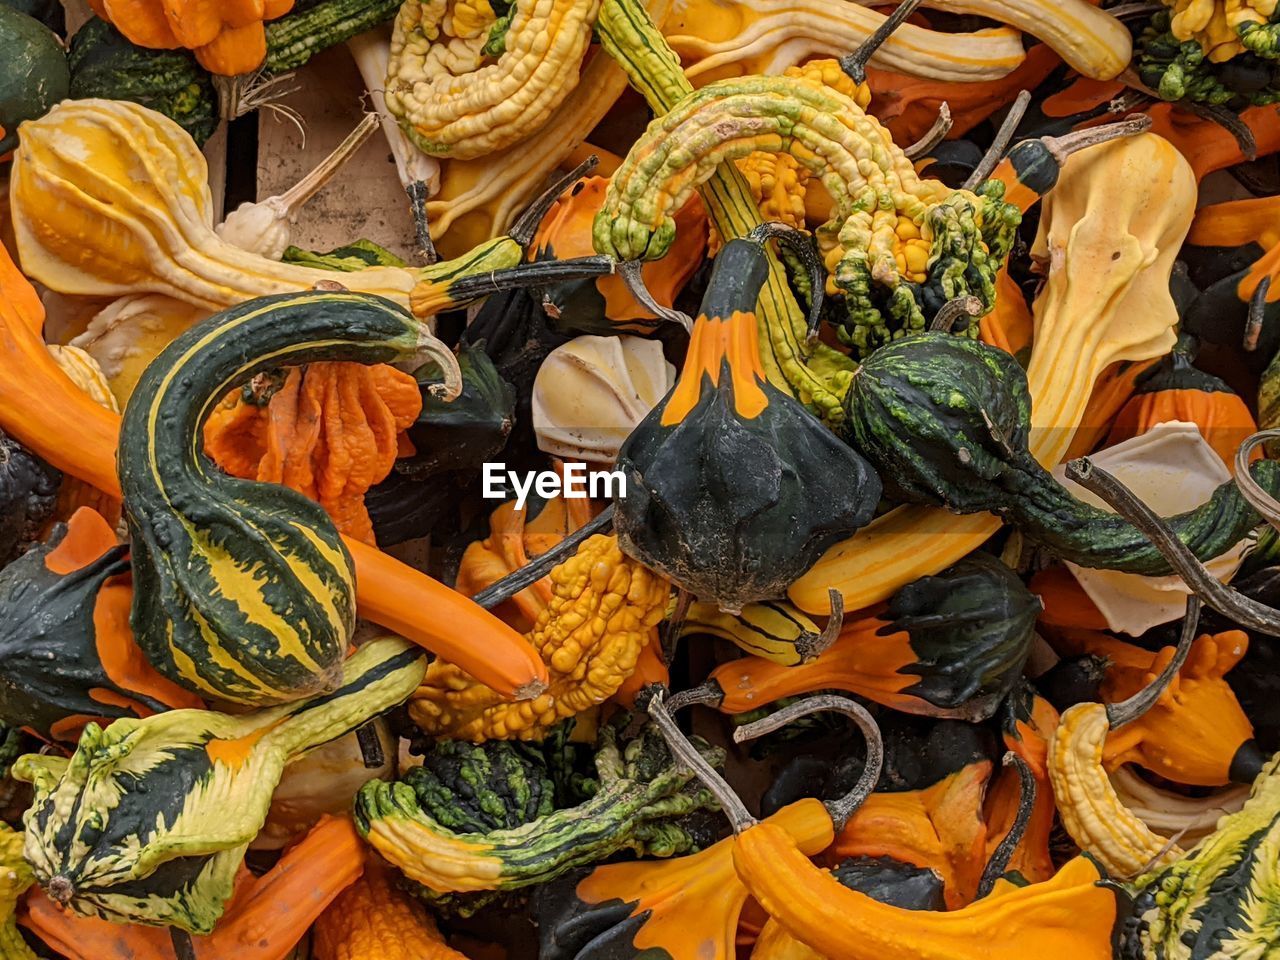 HIGH ANGLE VIEW OF VEGETABLES FOR SALE